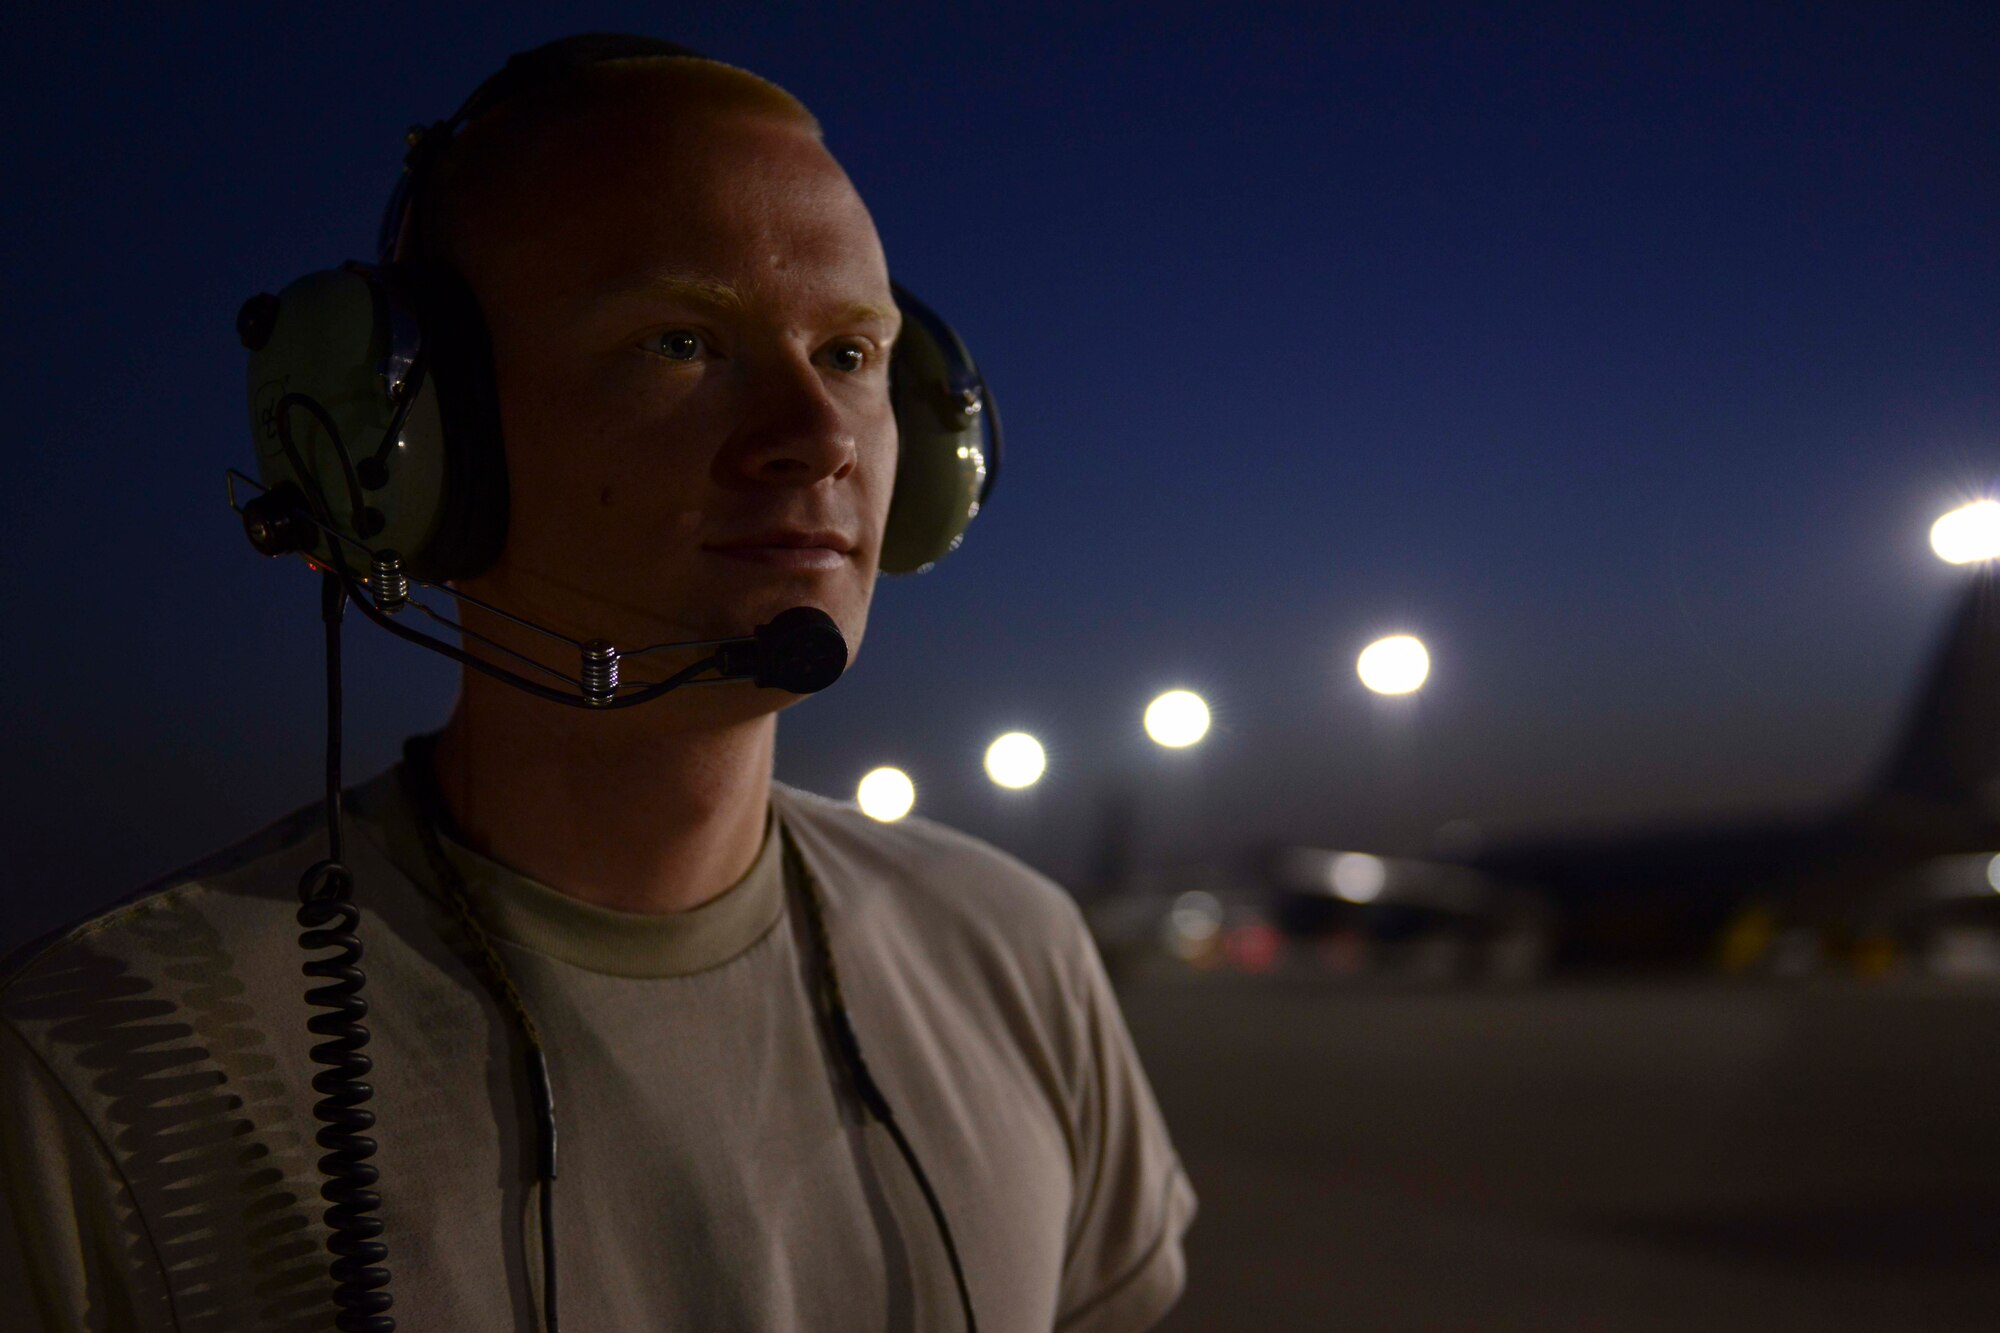 U.S. Air Force Airman 1st Class Olin Enzor, 763rd Aircraft Maintenance Unit electronics and environmental specialist, looks out at early morning maintenance operations at Al Udeid Air Base, Qatar, July 11, 2014. Enzor is deployed from Offut Air Force Base, Nebraska and hails from Macon, Georgia. (U.S. Air Force photo by Staff Sgt. Ciara Wymbs)